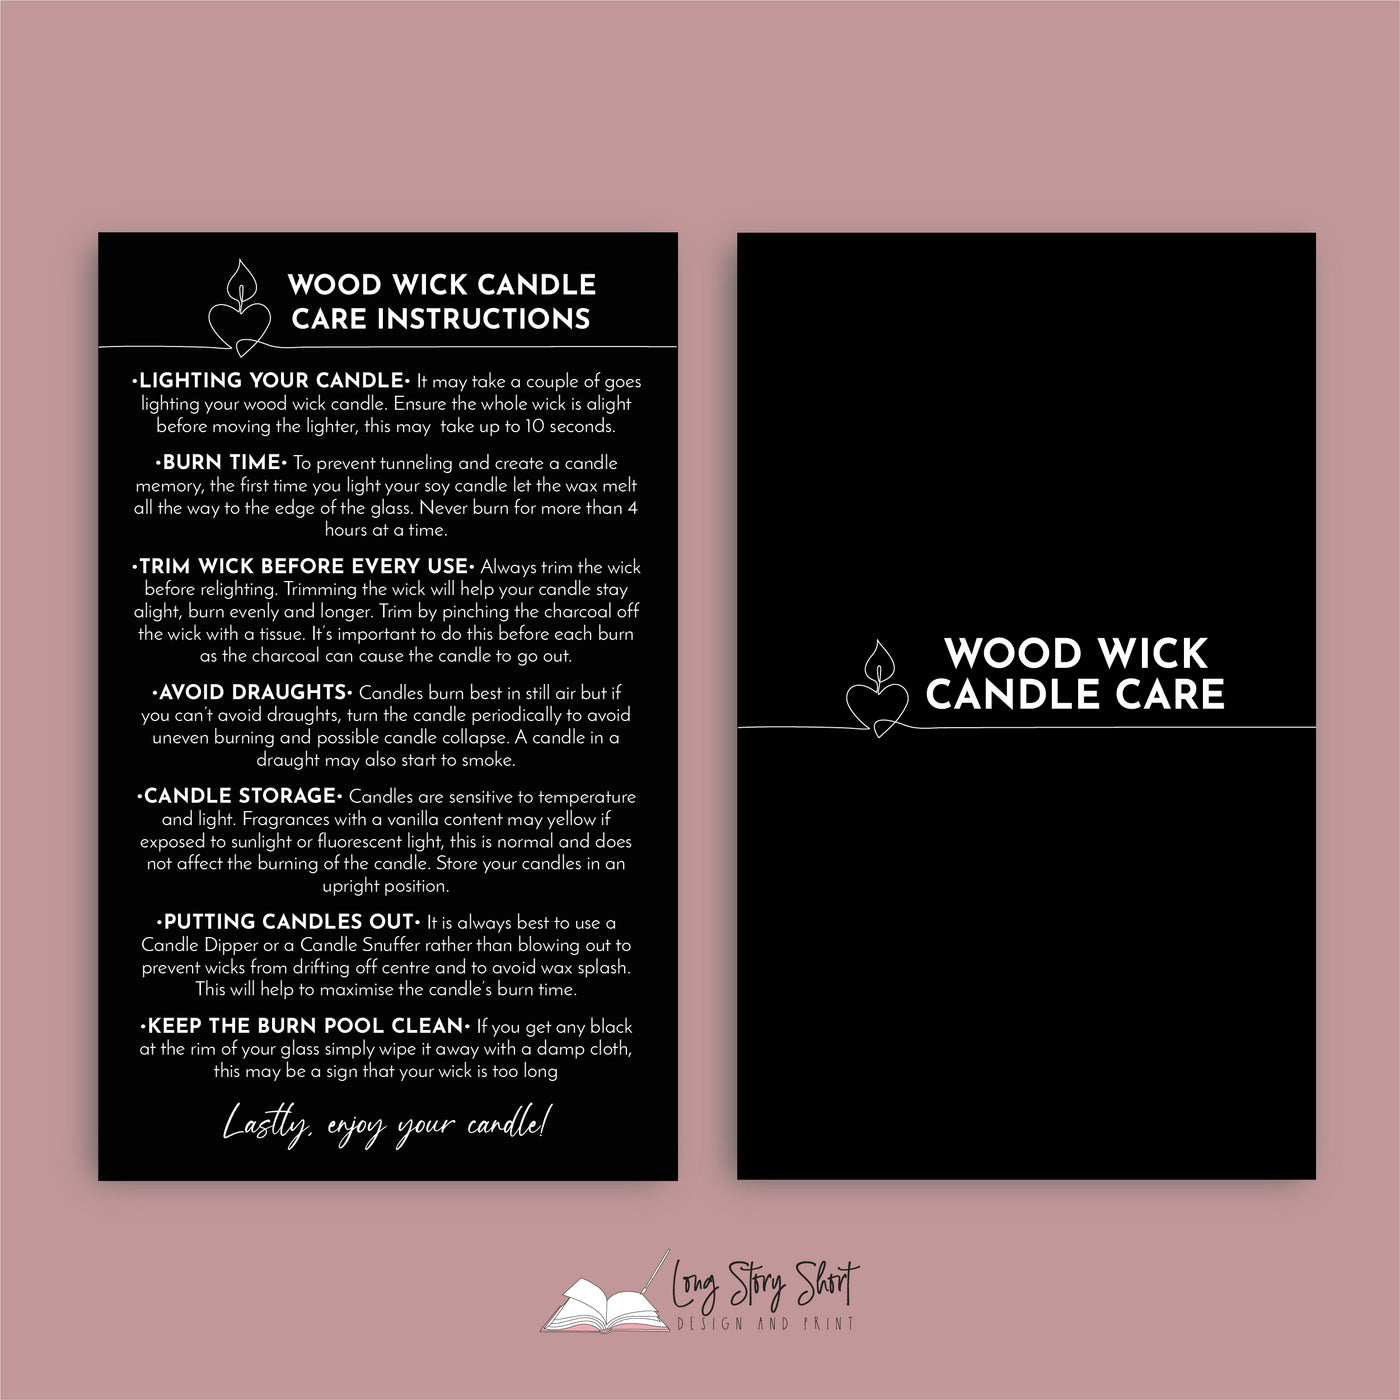 Wood Wick Candle Care Card Templates